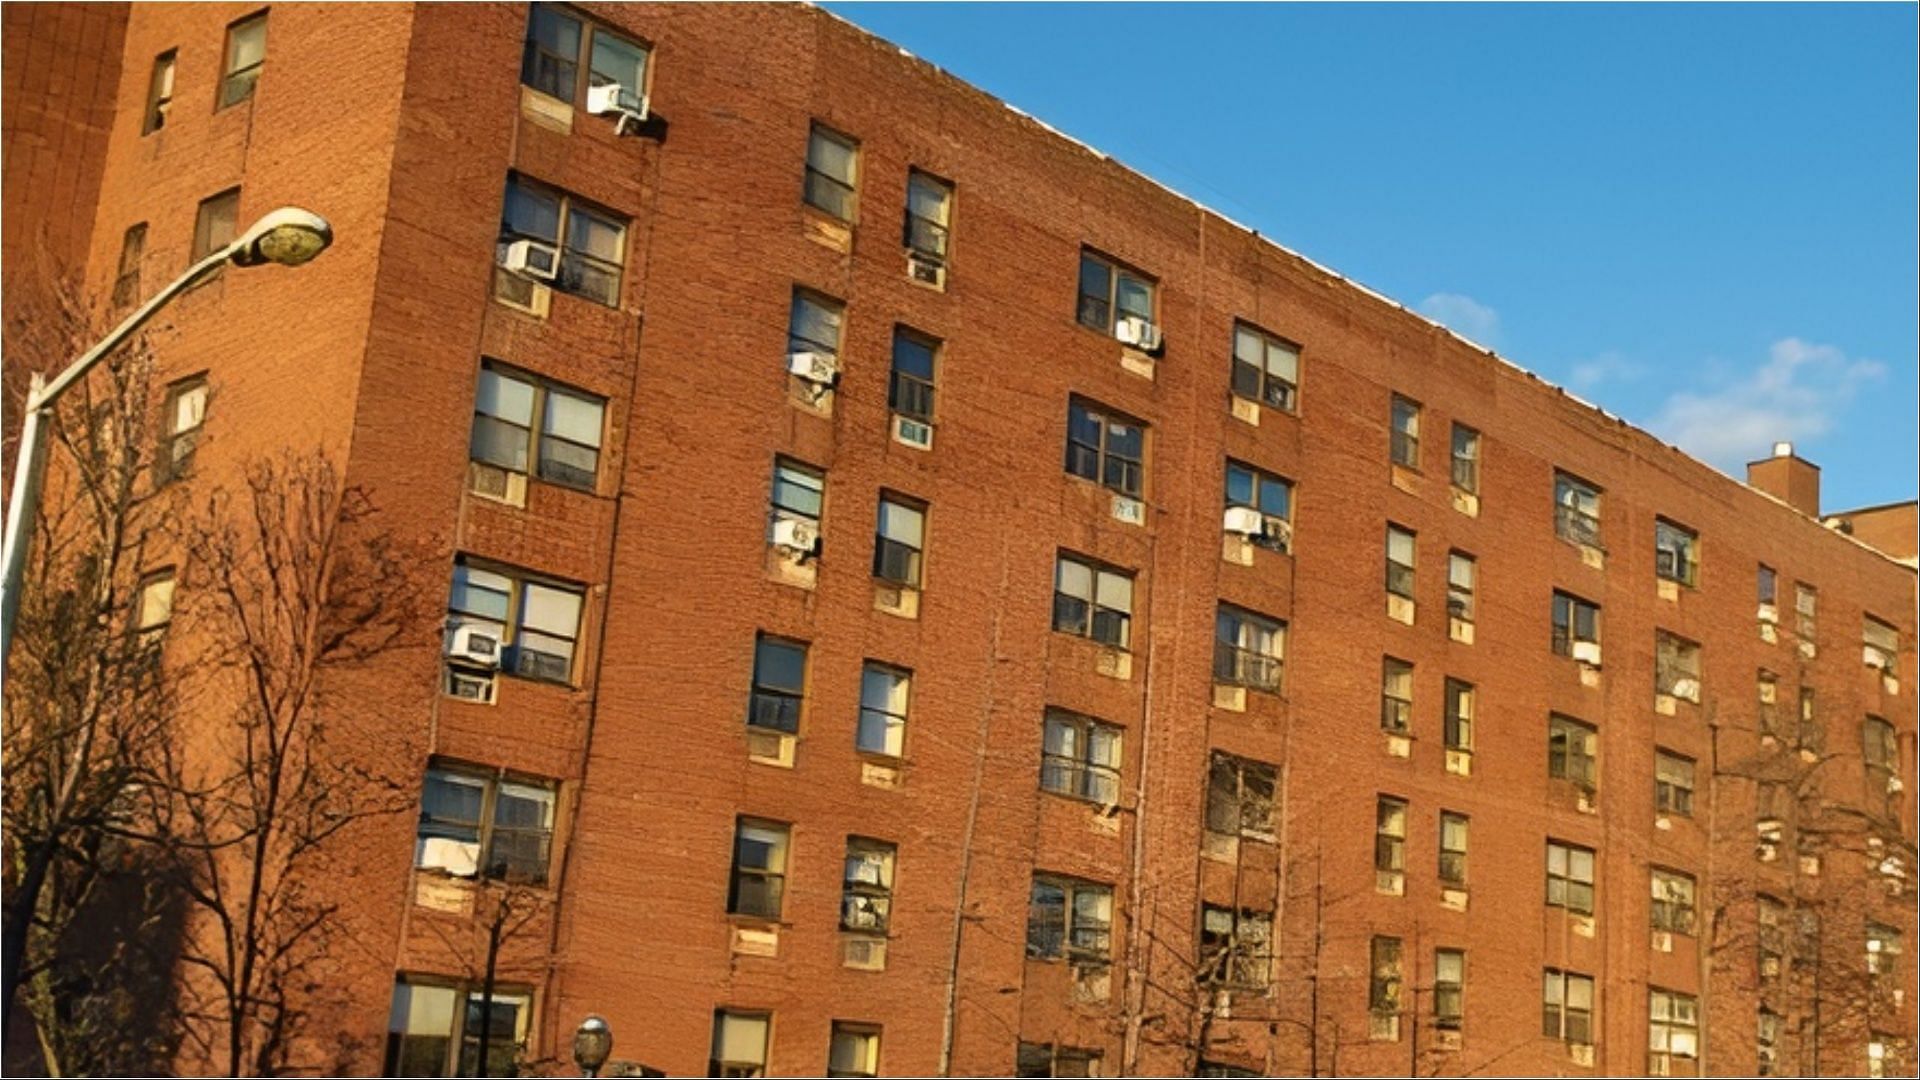 Why Were 70 Nycha Employees Arrested Full Form And Charges Explained